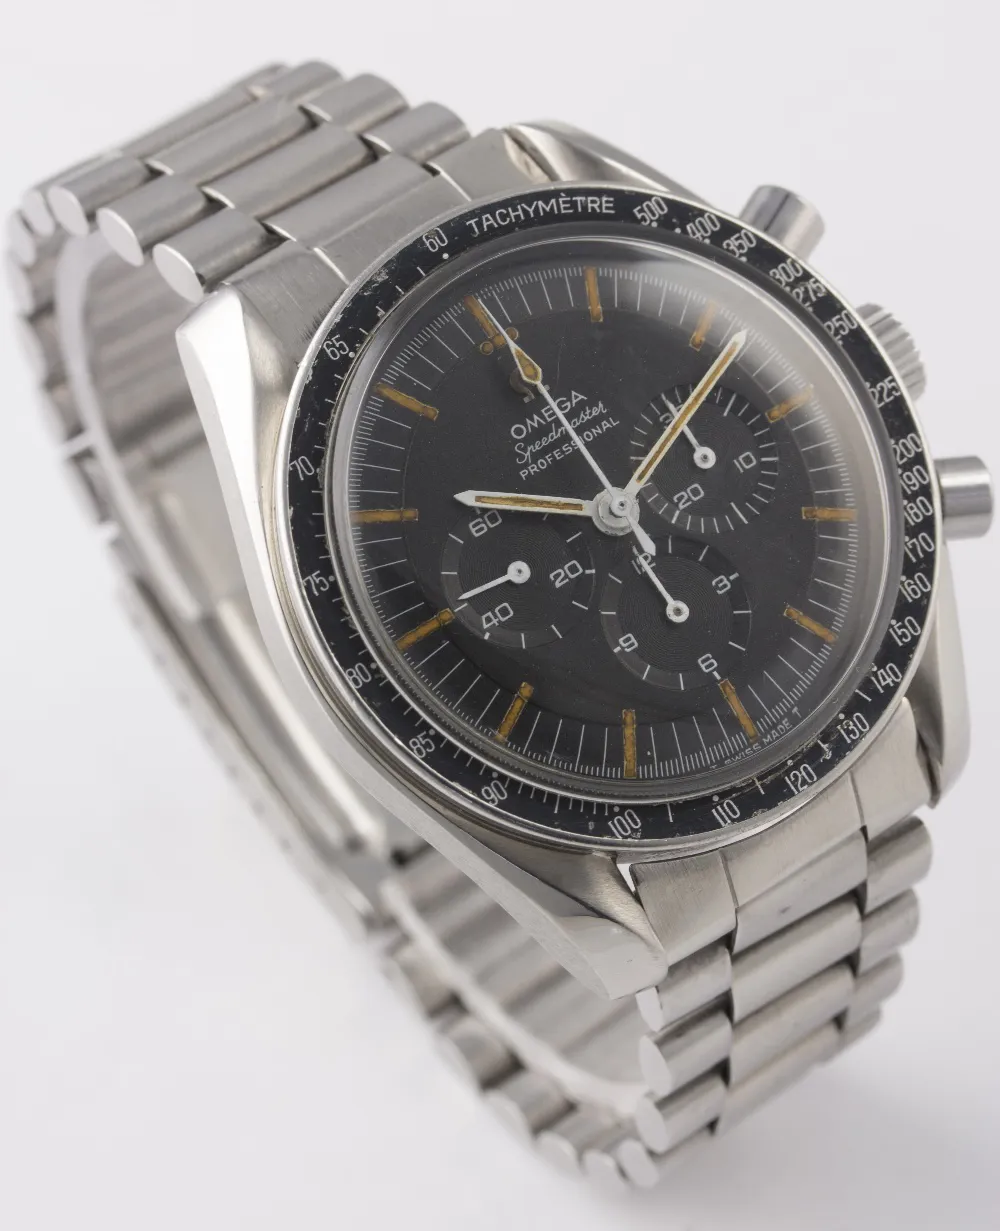 Omega Speedmaster Professional Moonwatch Moonphase 145.012-67 42mm Stainless steel Black 5